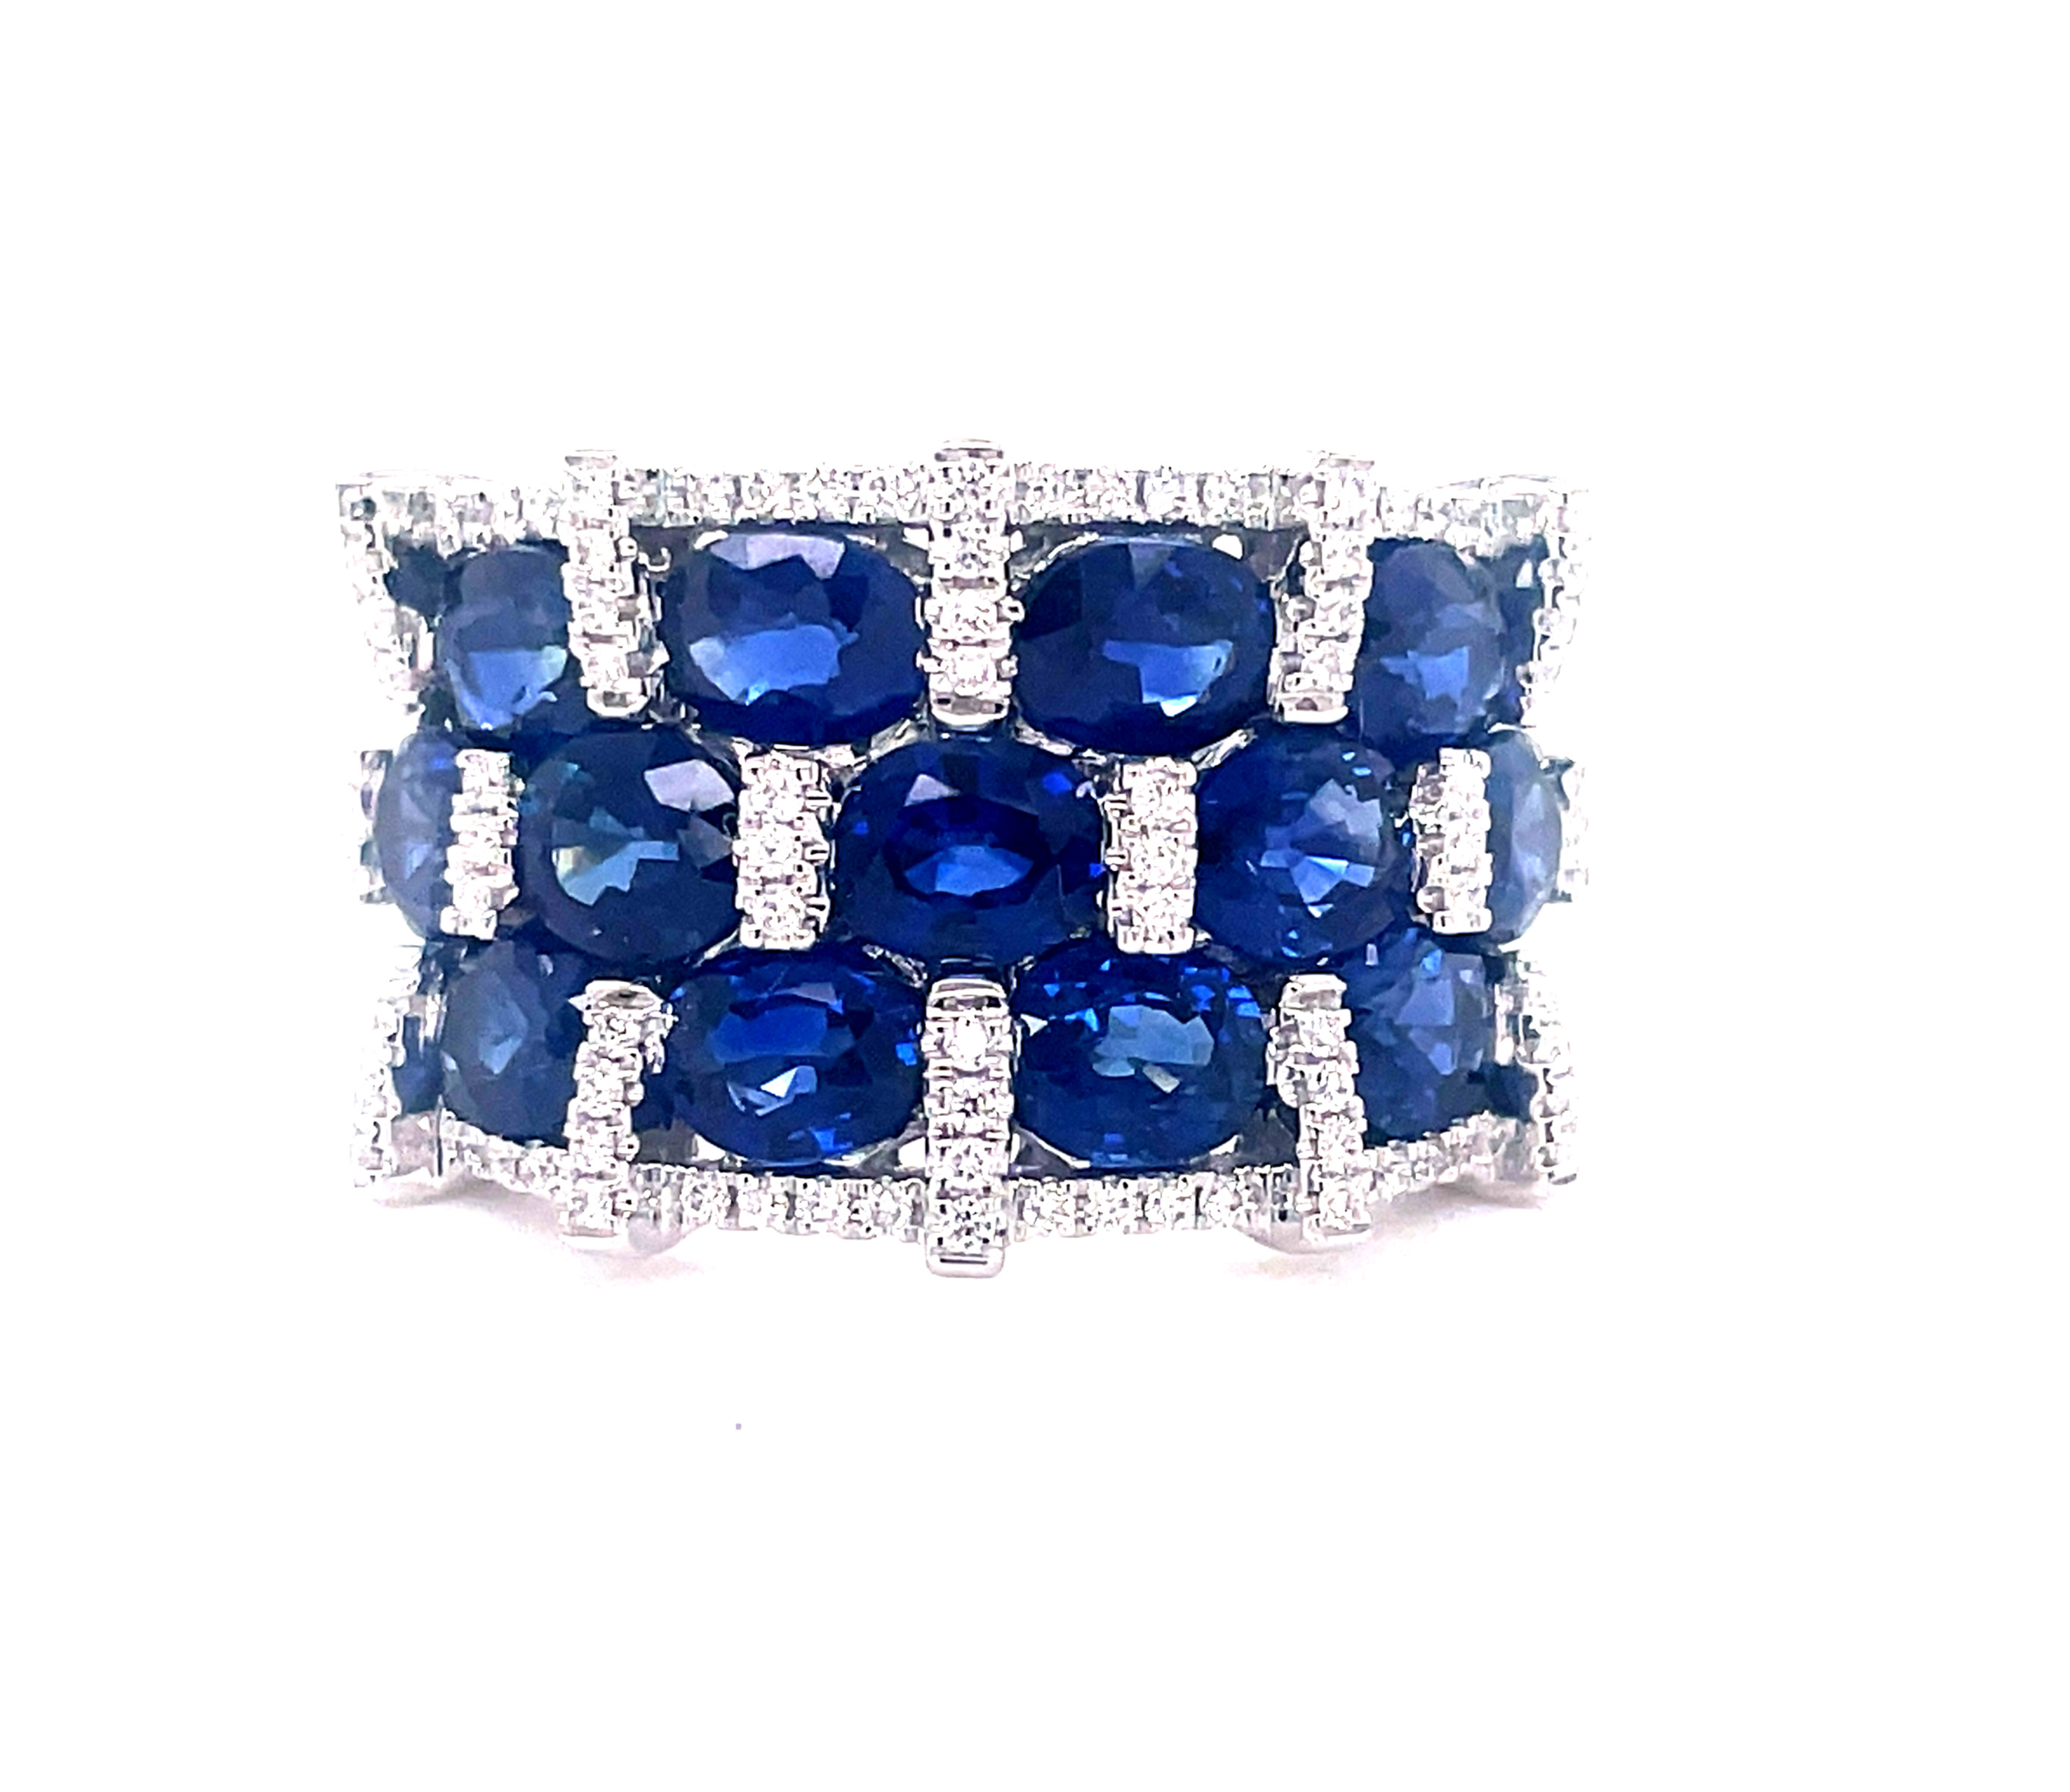 Stunningly crafted in 14k white gold, this regal ring flaunts oval sapphires at 5.36 cts and round diamonds at 0.32 cts, all set in a wide, 15.00 mm band. With an F color and VS1 clarity rating, this is a masterpiece of craftsmanship!